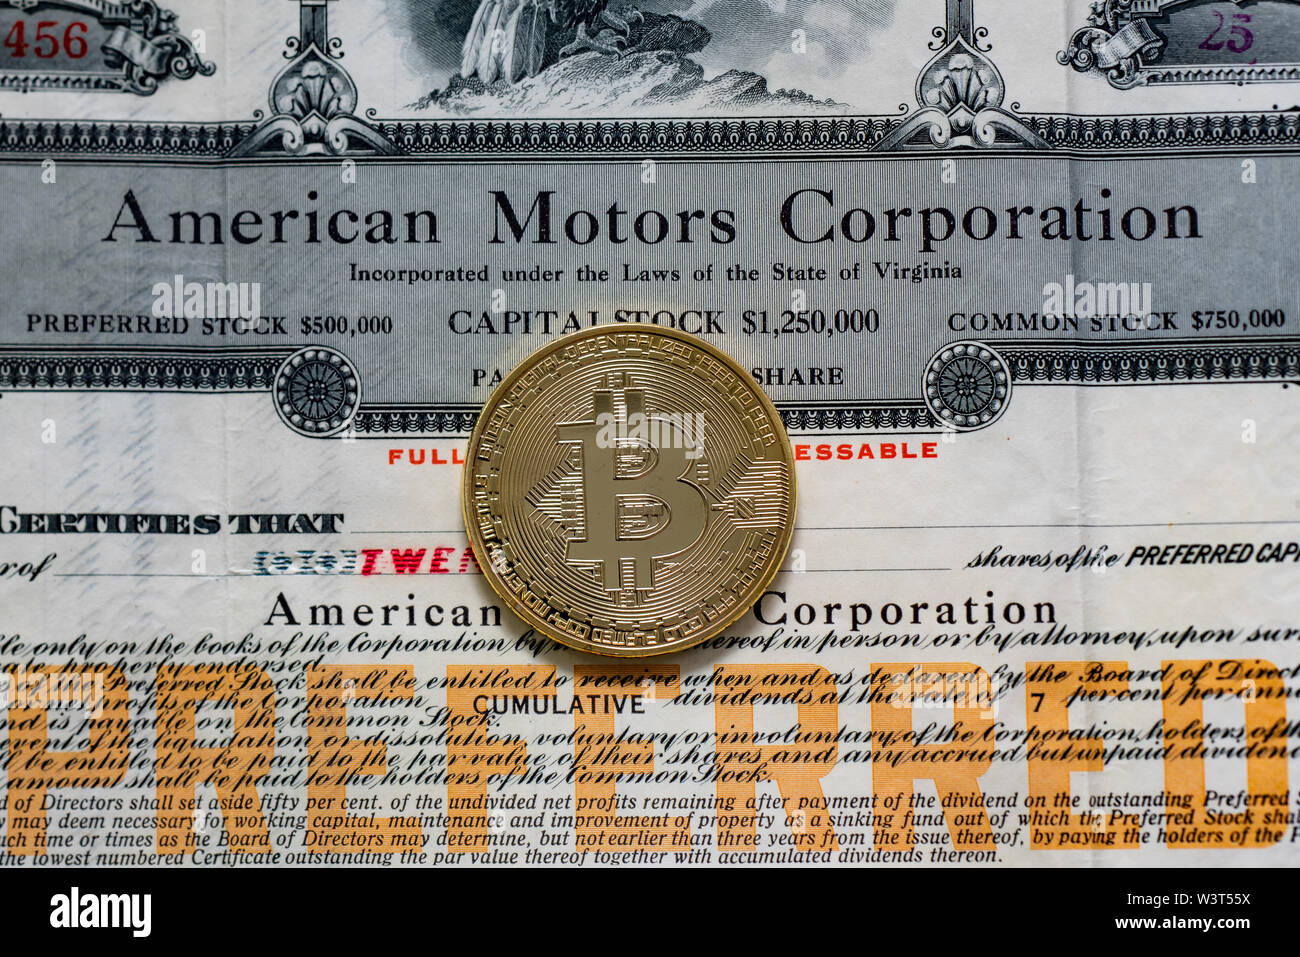 A gold colored bitcoin on an old preferred stock certificate from American Motors Corporation, a comparison of value and risk in financial markets. Stock Photo